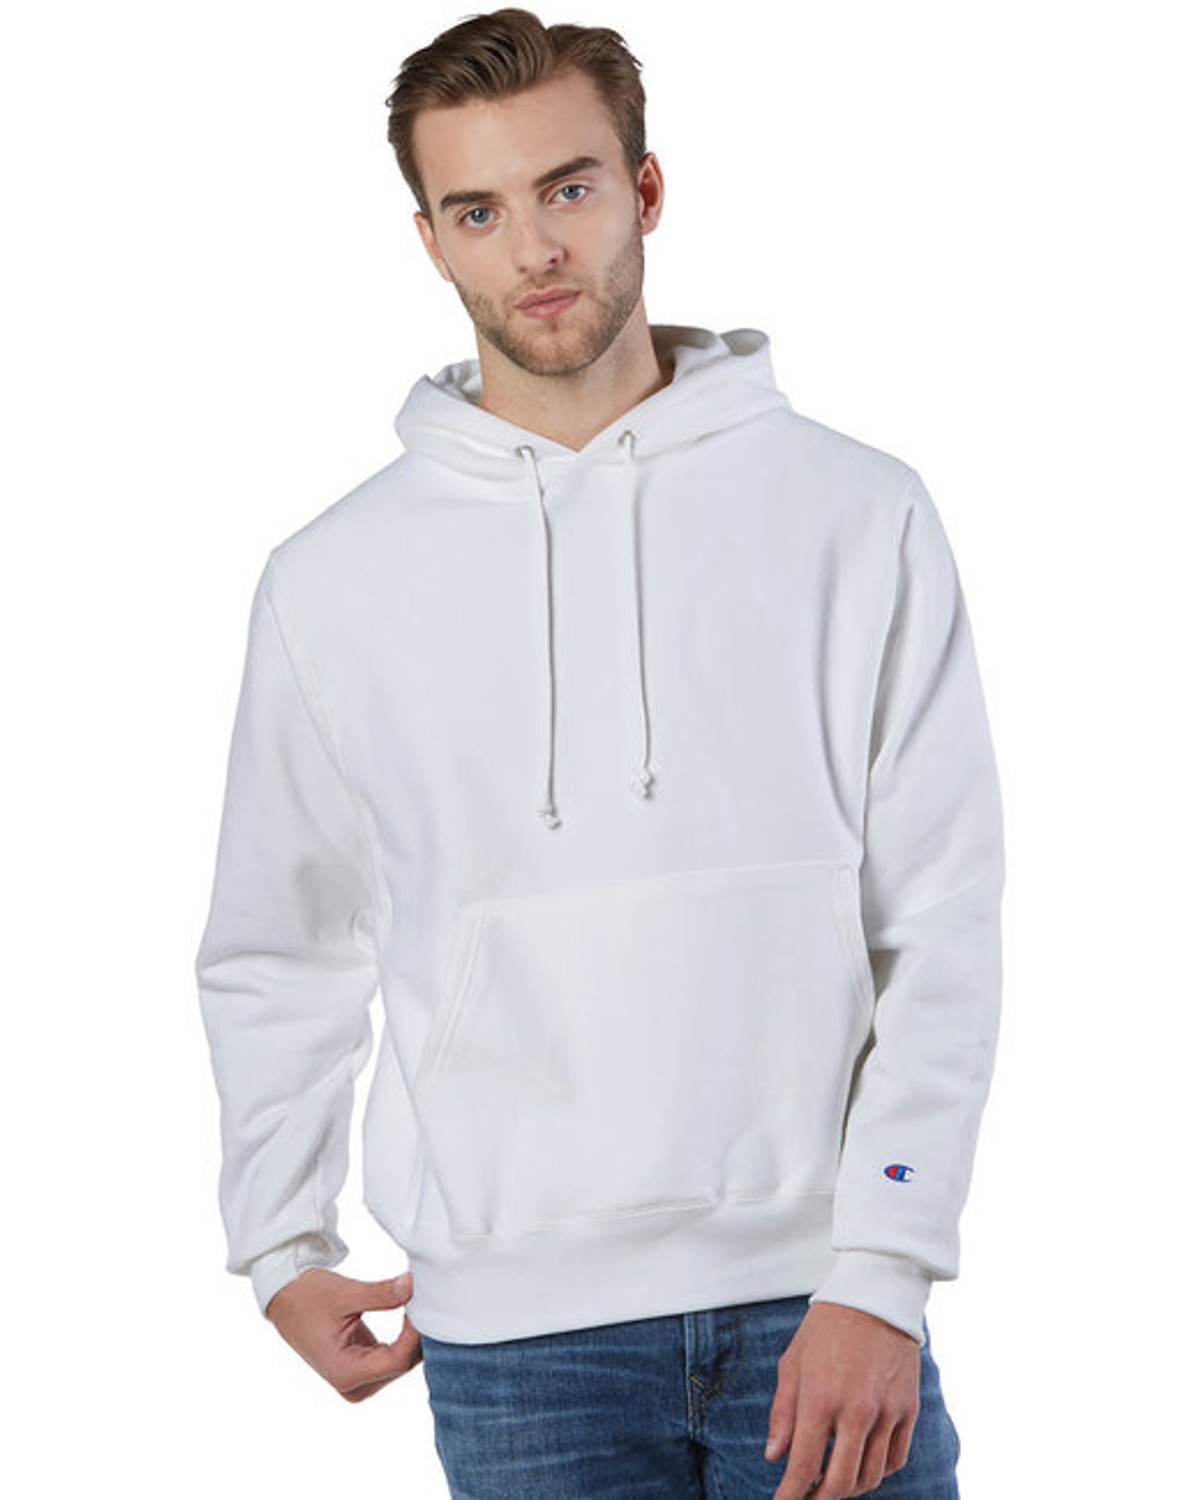 This Champion Hoodie Is Super Cheap Right Now (Yep, the Reverse Weave)